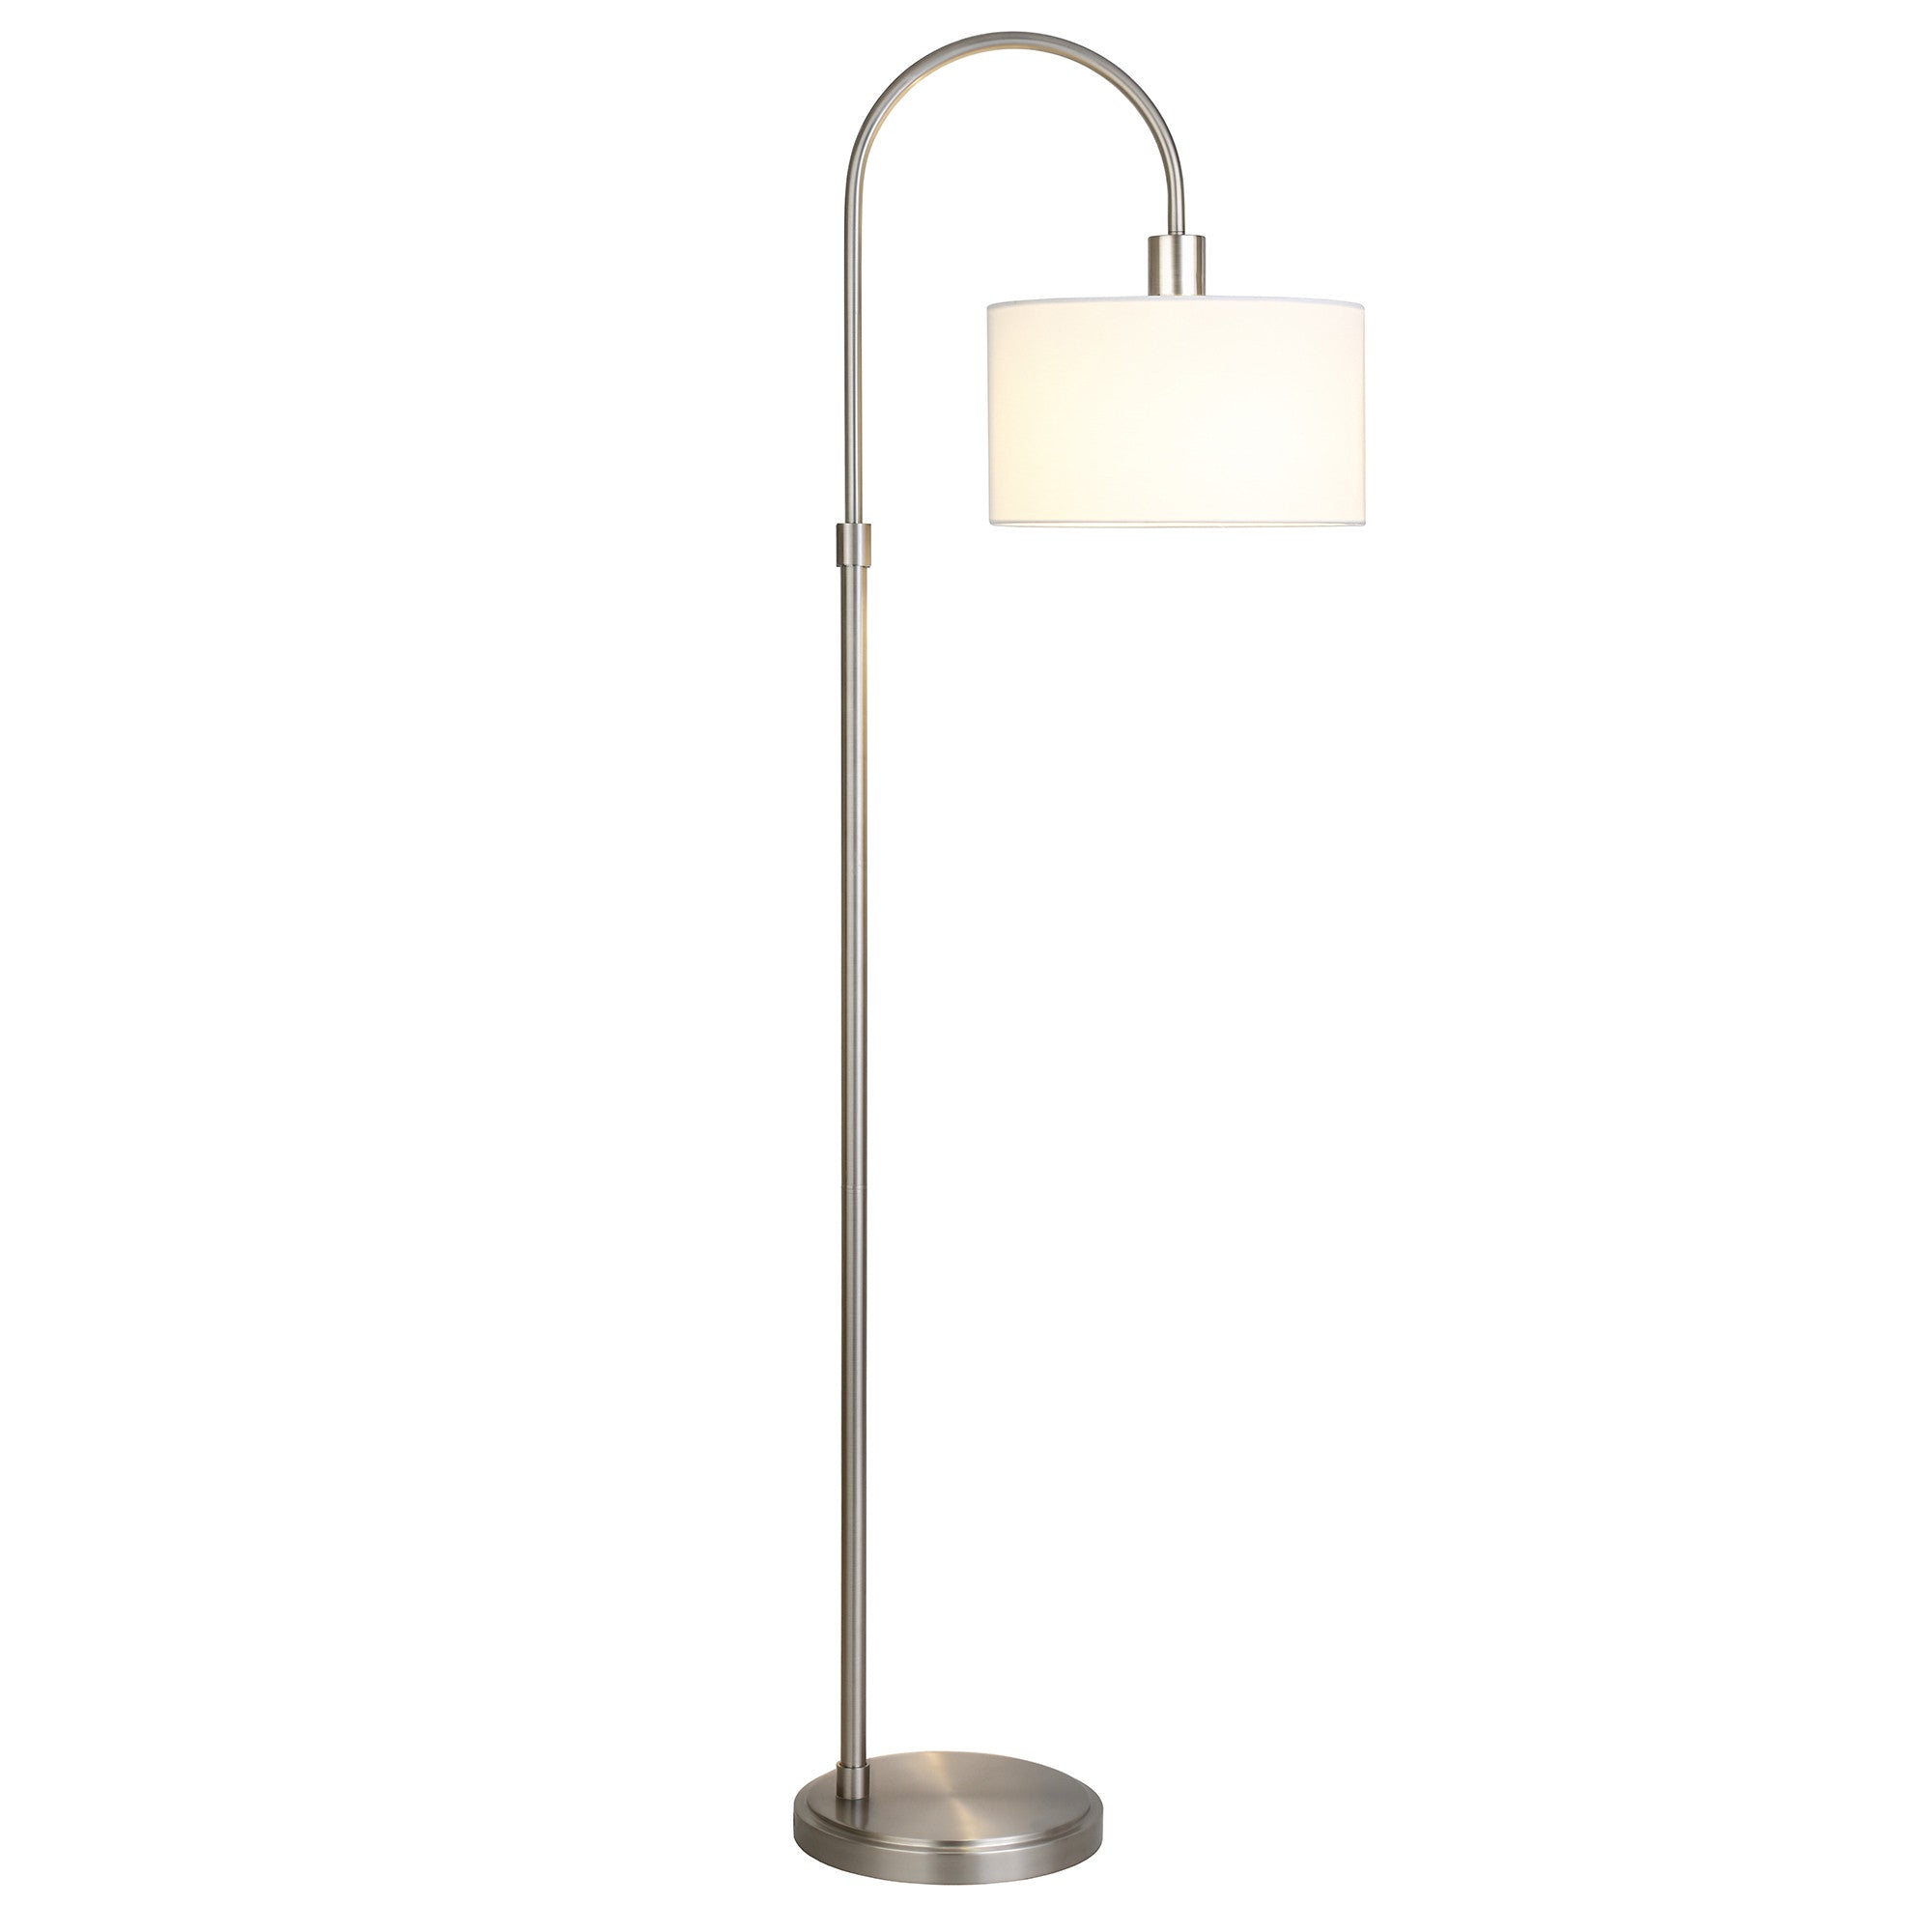 70" Nickel Arched Floor Lamp With White Frosted Glass Drum Shade